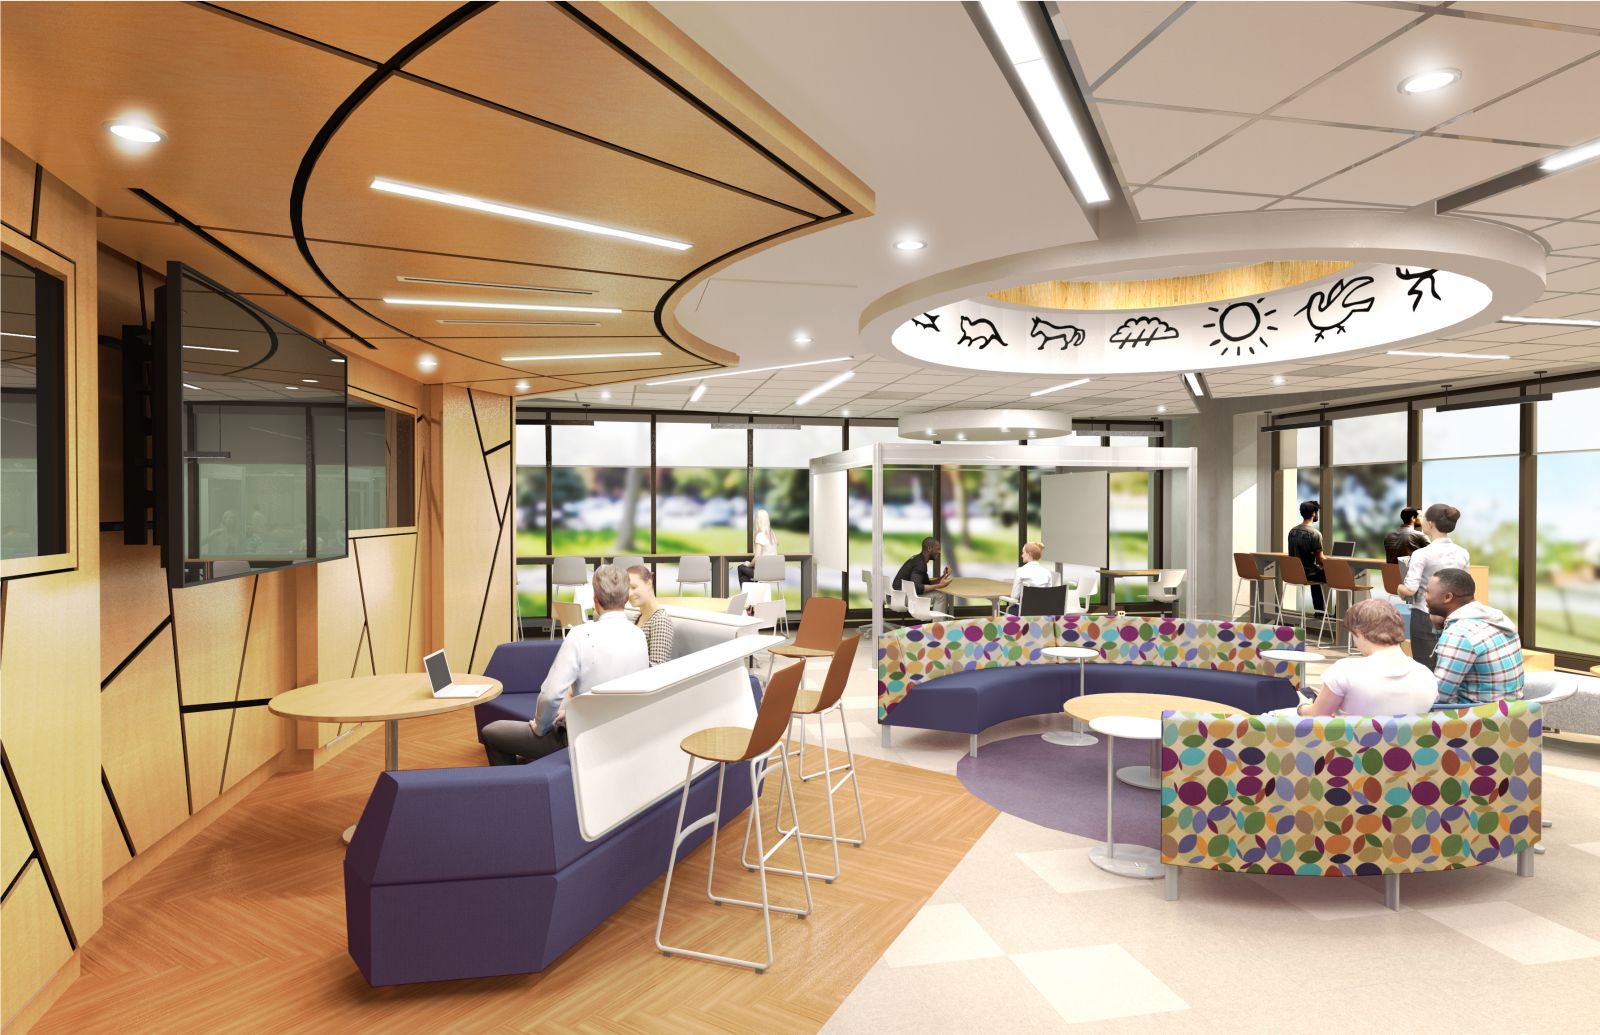 Design Rendering of Student Research Collaboratory